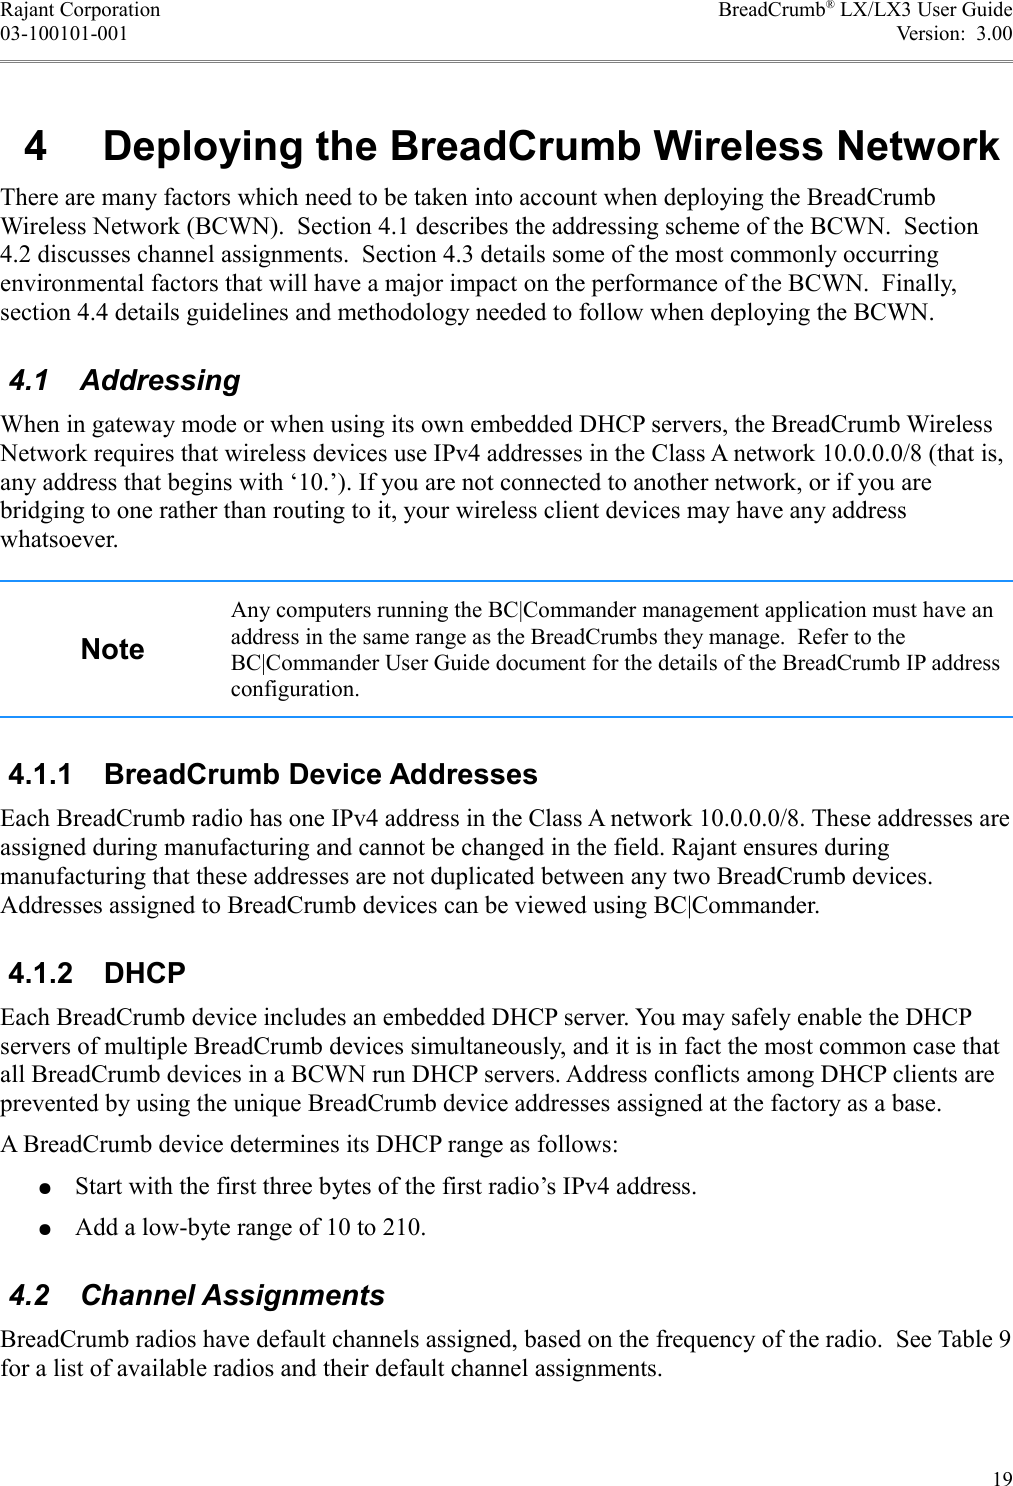 Rajant Corporation BreadCrumb® LX/LX3 User Guide03-100101-001 Version:  3.00 4  Deploying the BreadCrumb Wireless NetworkThere are many factors which need to be taken into account when deploying the BreadCrumb Wireless Network (BCWN).  Section 4.1 describes the addressing scheme of the BCWN.  Section 4.2 discusses channel assignments.  Section 4.3 details some of the most commonly occurring environmental factors that will have a major impact on the performance of the BCWN.  Finally, section 4.4 details guidelines and methodology needed to follow when deploying the BCWN. 4.1  AddressingWhen in gateway mode or when using its own embedded DHCP servers, the BreadCrumb Wireless Network requires that wireless devices use IPv4 addresses in the Class A network 10.0.0.0/8 (that is, any address that begins with ‘10.’). If you are not connected to another network, or if you are bridging to one rather than routing to it, your wireless client devices may have any address whatsoever.NoteAny computers running the BC|Commander management application must have an address in the same range as the BreadCrumbs they manage.  Refer to the BC|Commander User Guide document for the details of the BreadCrumb IP address configuration. 4.1.1  BreadCrumb Device AddressesEach BreadCrumb radio has one IPv4 address in the Class A network 10.0.0.0/8. These addresses are assigned during manufacturing and cannot be changed in the field. Rajant ensures during manufacturing that these addresses are not duplicated between any two BreadCrumb devices. Addresses assigned to BreadCrumb devices can be viewed using BC|Commander. 4.1.2  DHCPEach BreadCrumb device includes an embedded DHCP server. You may safely enable the DHCP servers of multiple BreadCrumb devices simultaneously, and it is in fact the most common case that all BreadCrumb devices in a BCWN run DHCP servers. Address conflicts among DHCP clients are prevented by using the unique BreadCrumb device addresses assigned at the factory as a base.A BreadCrumb device determines its DHCP range as follows:●Start with the first three bytes of the first radio’s IPv4 address.●Add a low-byte range of 10 to 210. 4.2  Channel AssignmentsBreadCrumb radios have default channels assigned, based on the frequency of the radio.  See Table 9 for a list of available radios and their default channel assignments.19